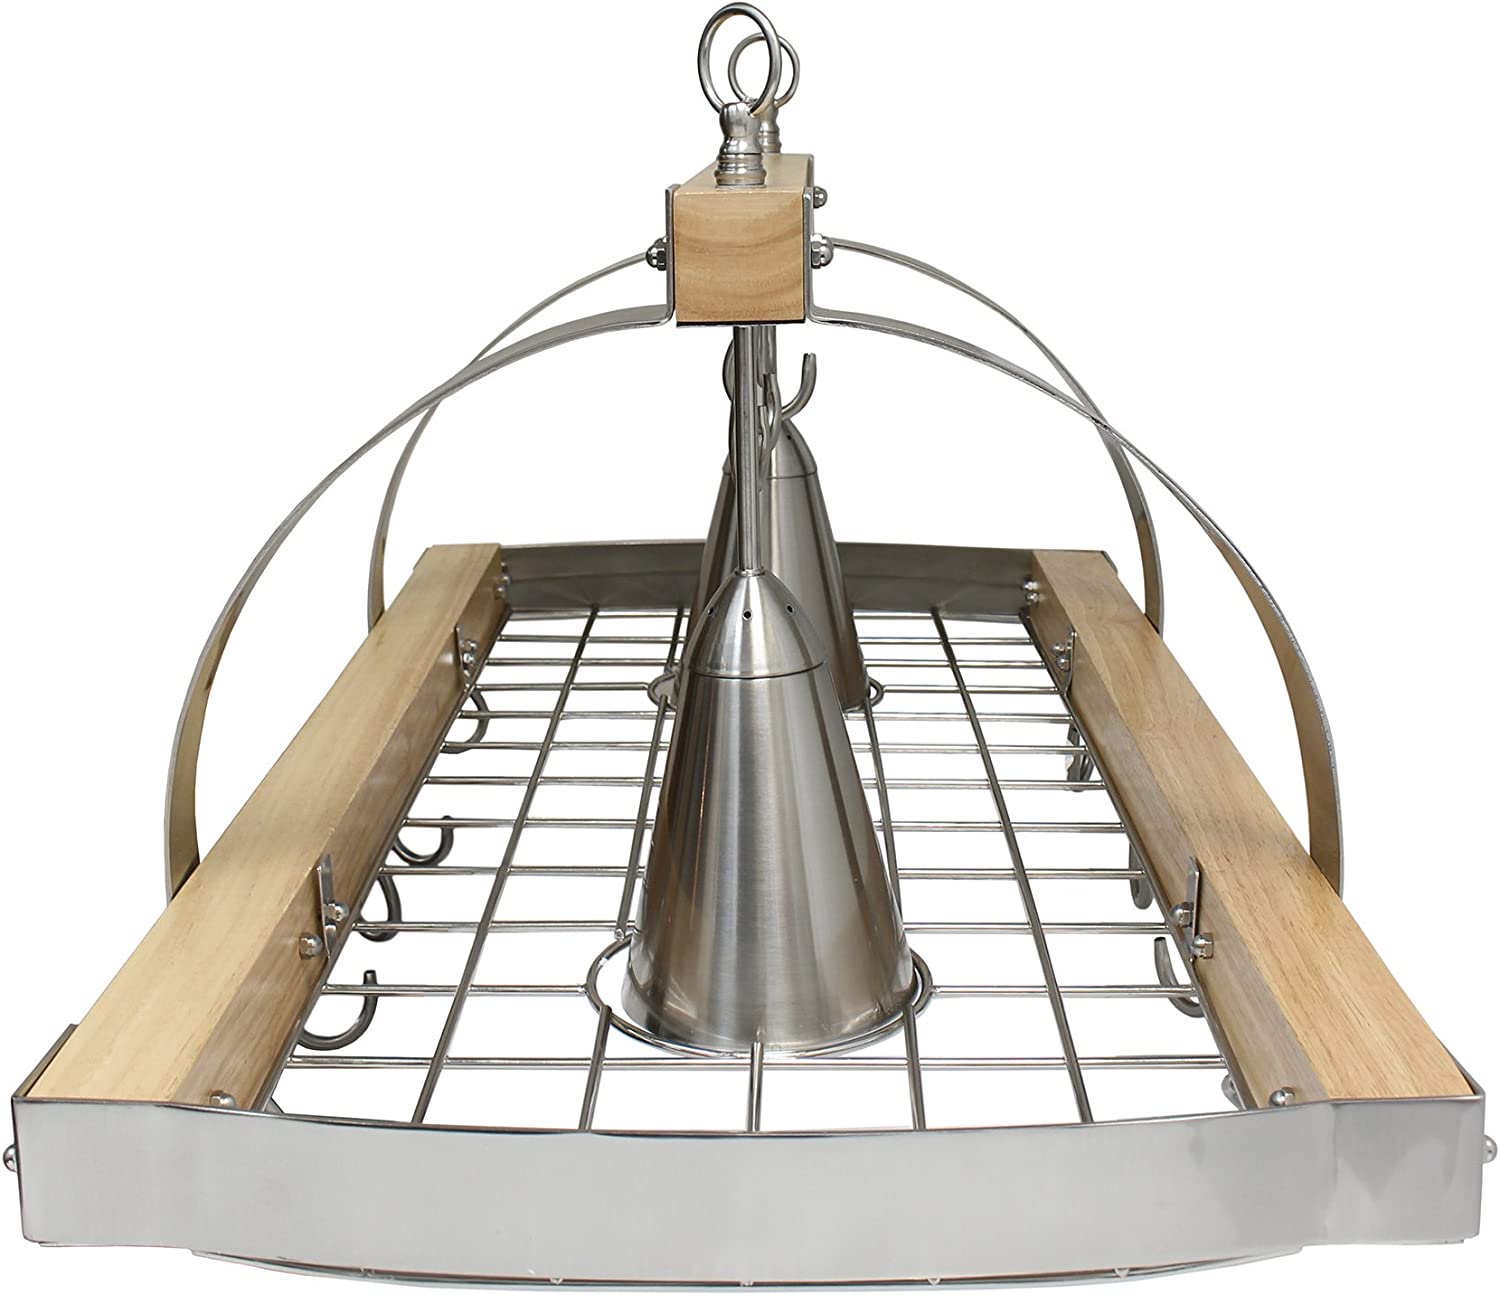 Elegant Designs PR1001-WOD 2 Light Kitchen Wood Pot Rack with Downlights, Wood with Brushed Nickel Accents